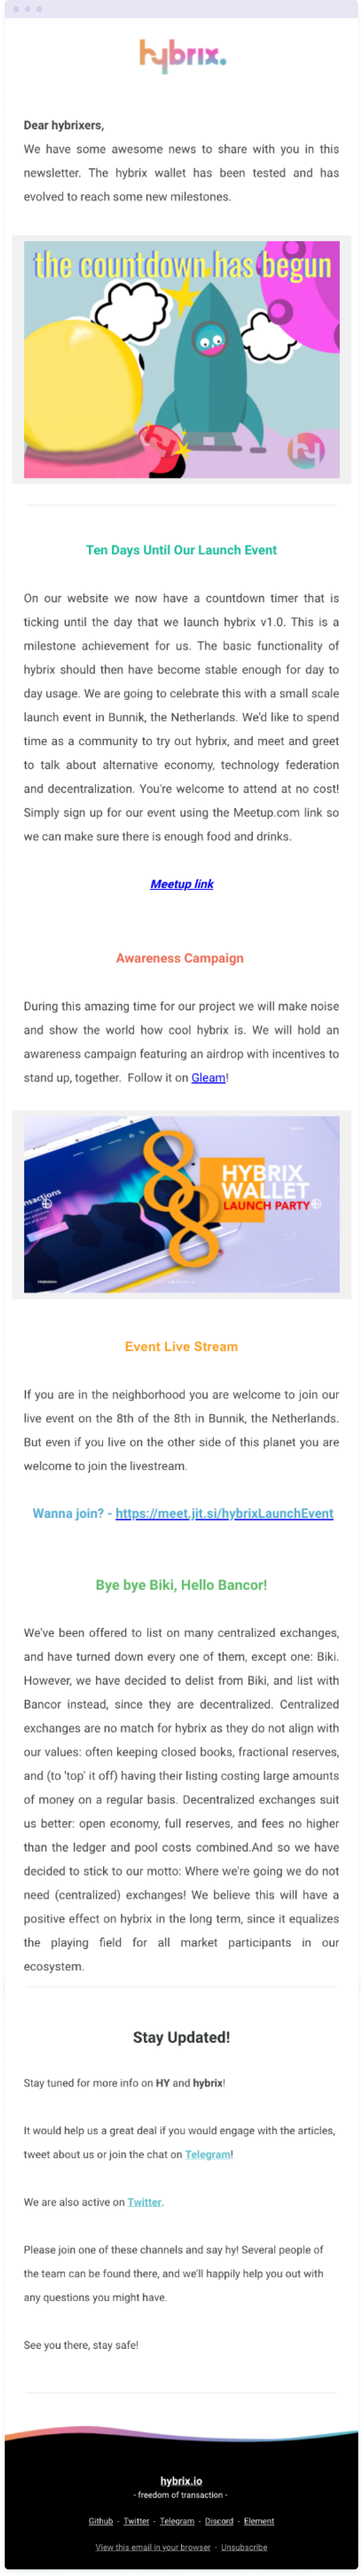 Example of an announcement email from Hybrix – just one type of email you can send your audience when getting started with email marketing